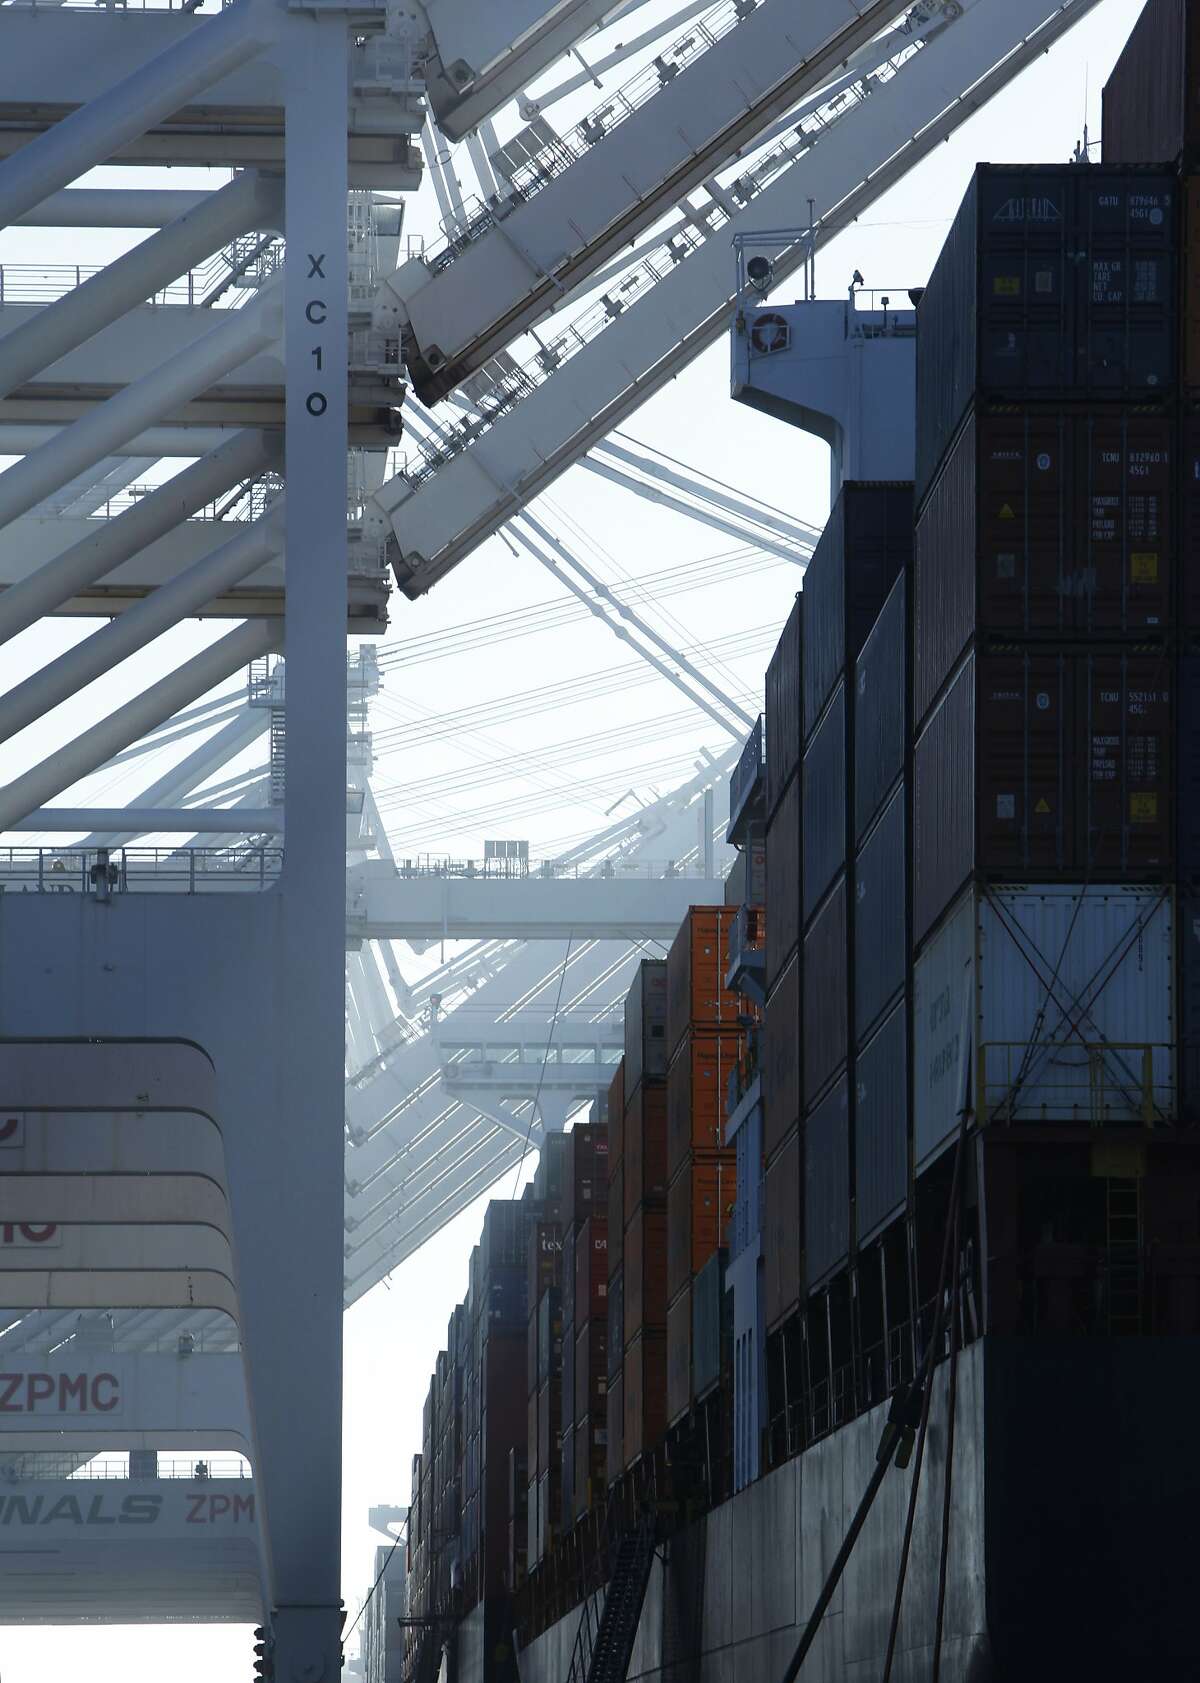 Containers from cargo ships are seen stacked under cranes in the Port of Oakland in Oakland, Calif. Saturday, February 21, 2015. The Port of Oakland recently reached a deal with longshoremen after labor disputes have created a backup of ships with cargo at the port.